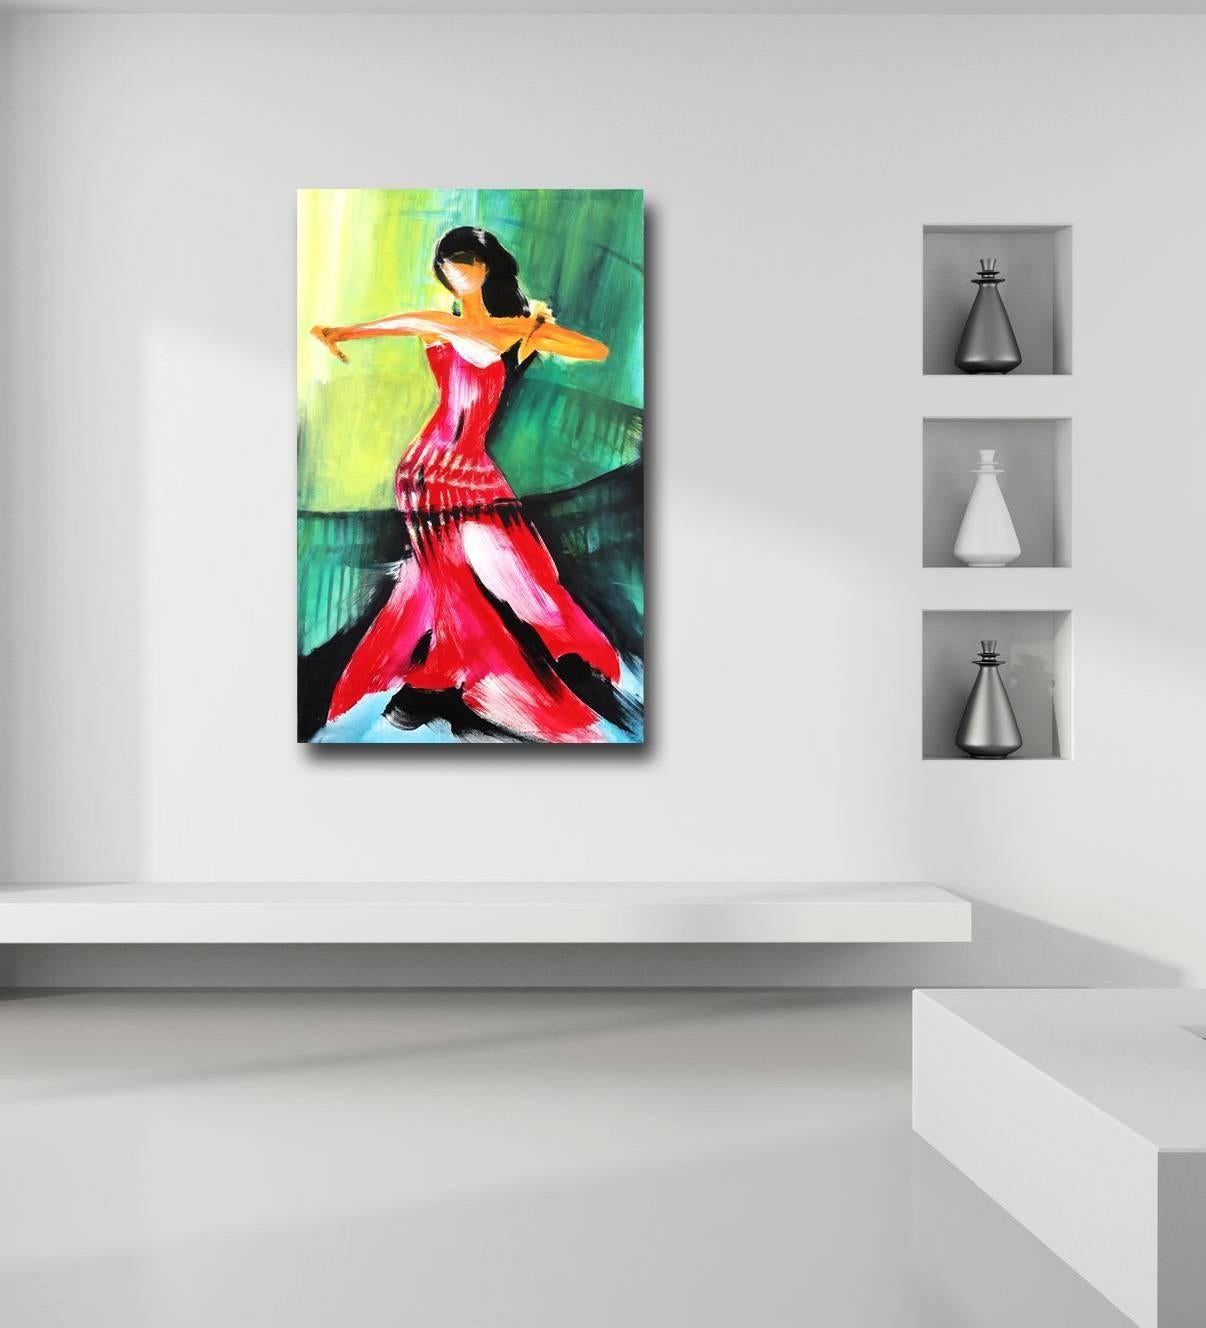 Dancer in Red - Large Colorful Expressive Figurative Oil Painting on Canvas - Green Abstract Painting by Bettina Mauel